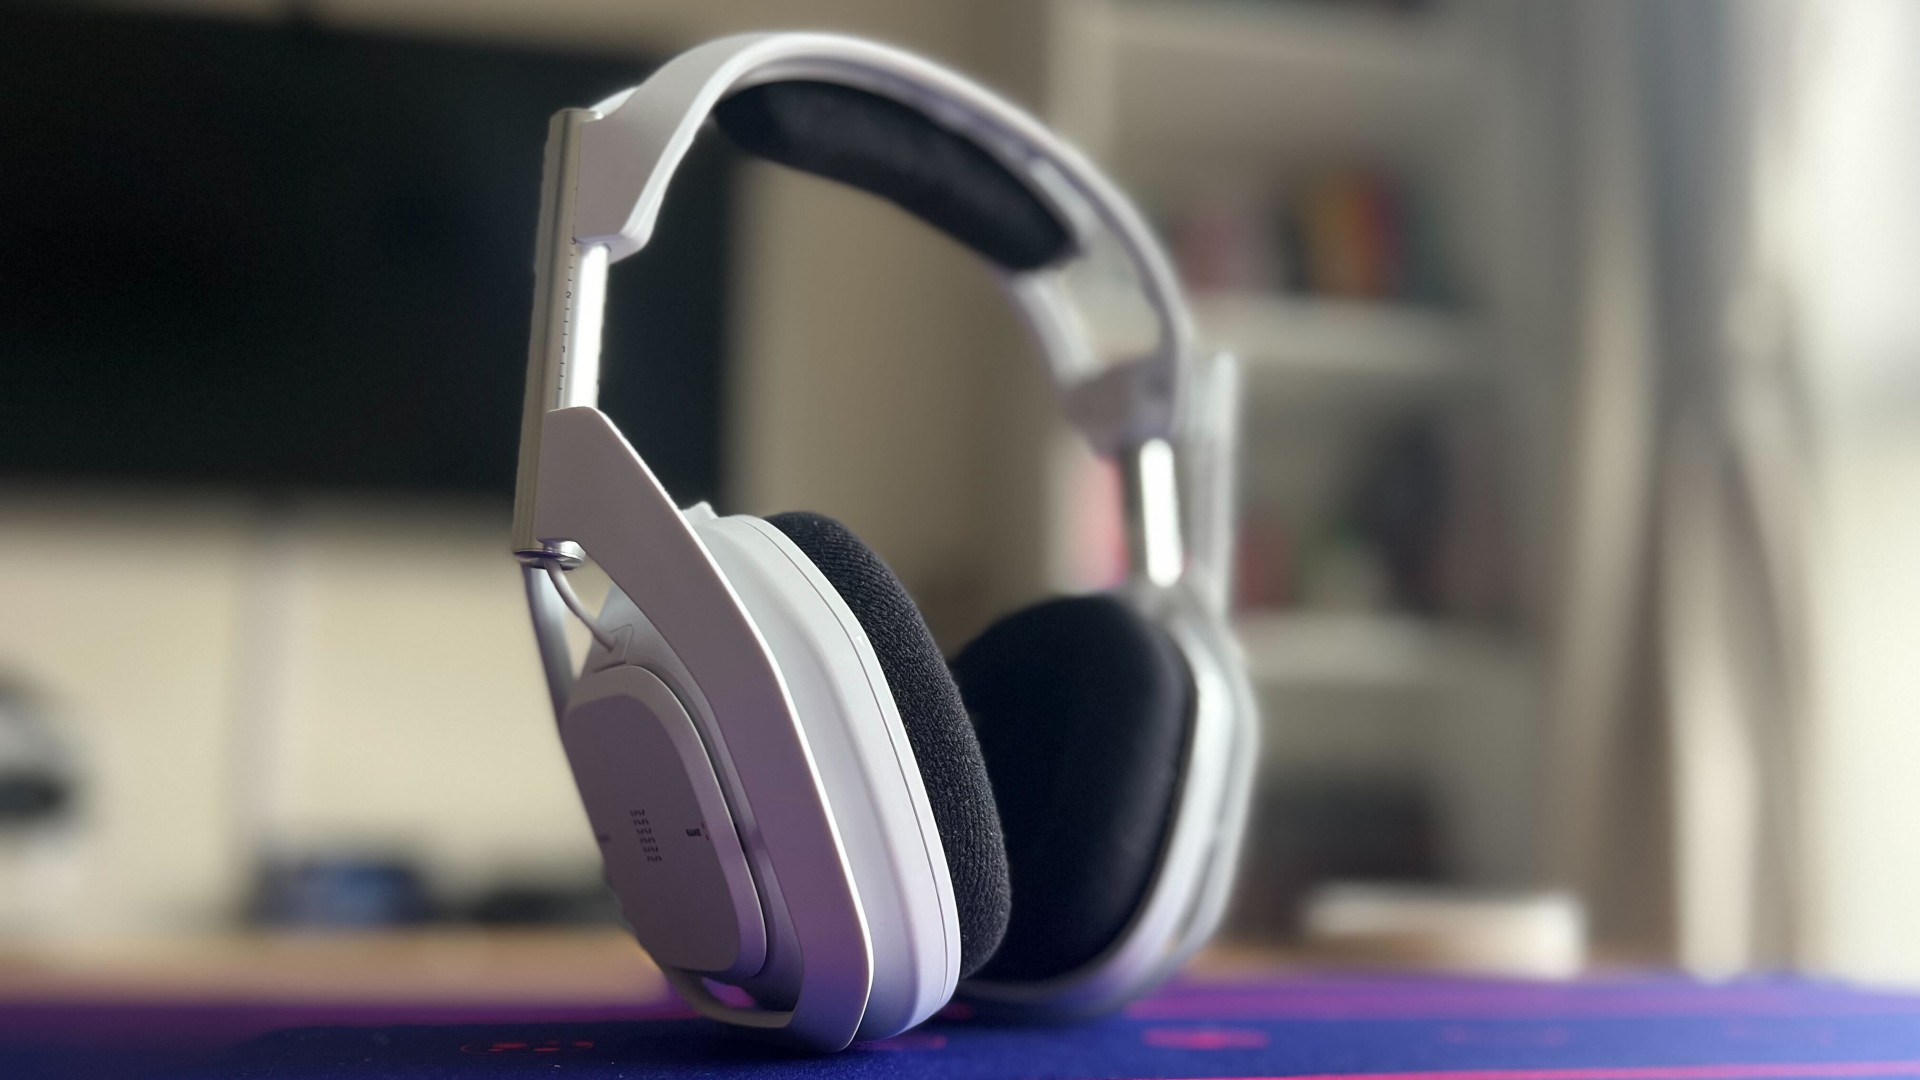 Astro A40 + MixAmp Pro headset review: Perfect for PC, less so for PS5